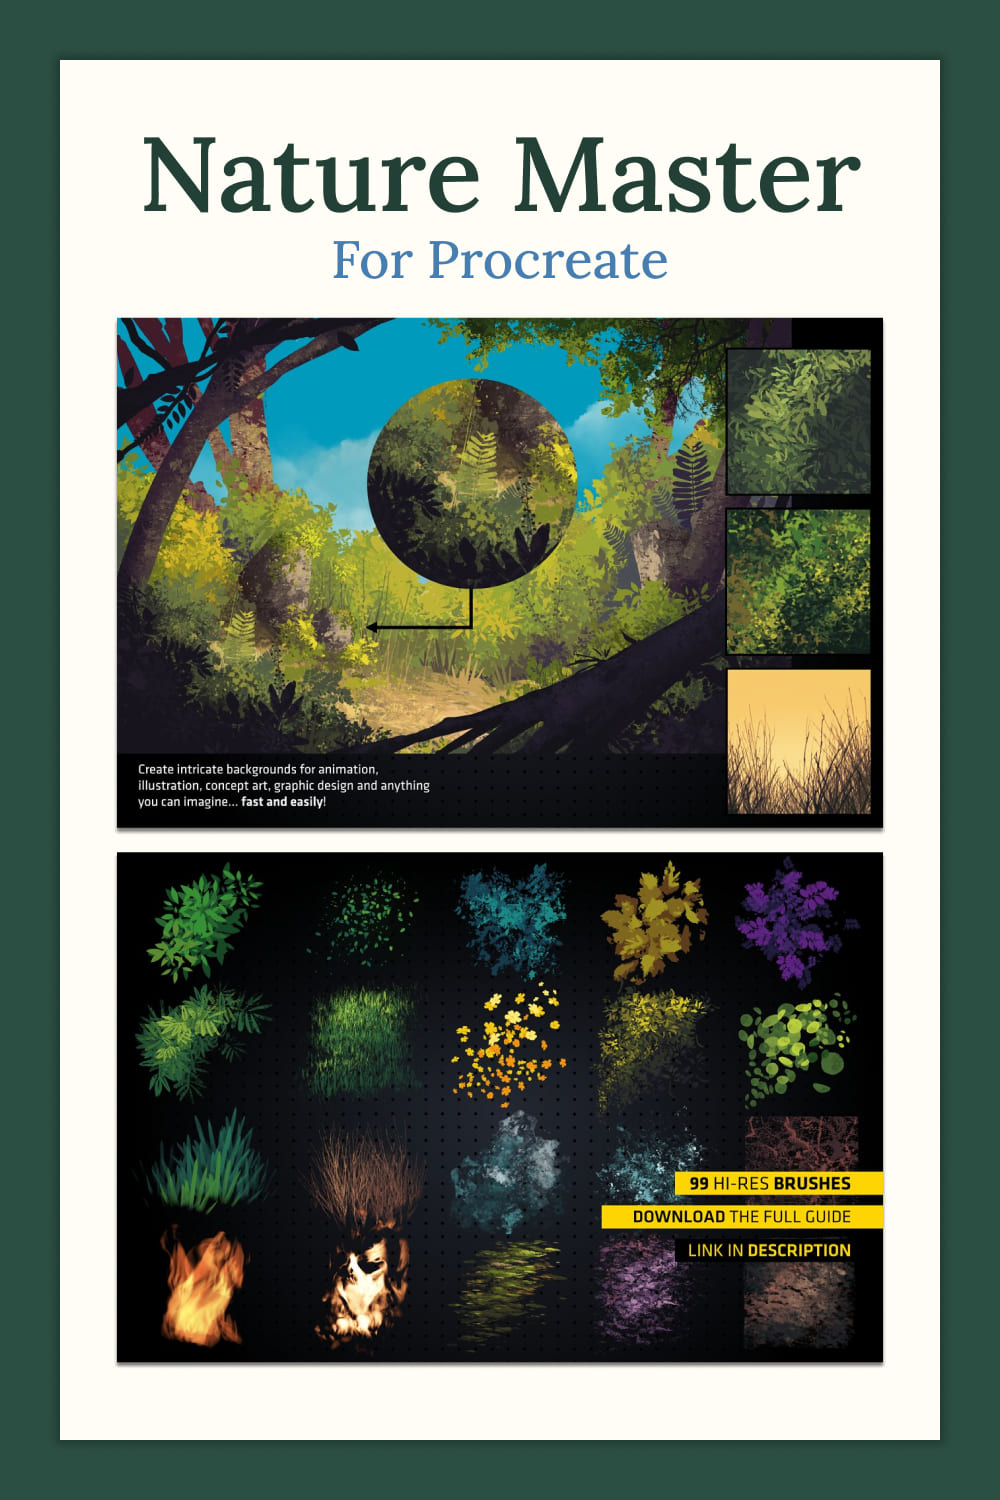 Nature Master for Procreate - pinterest image preview.